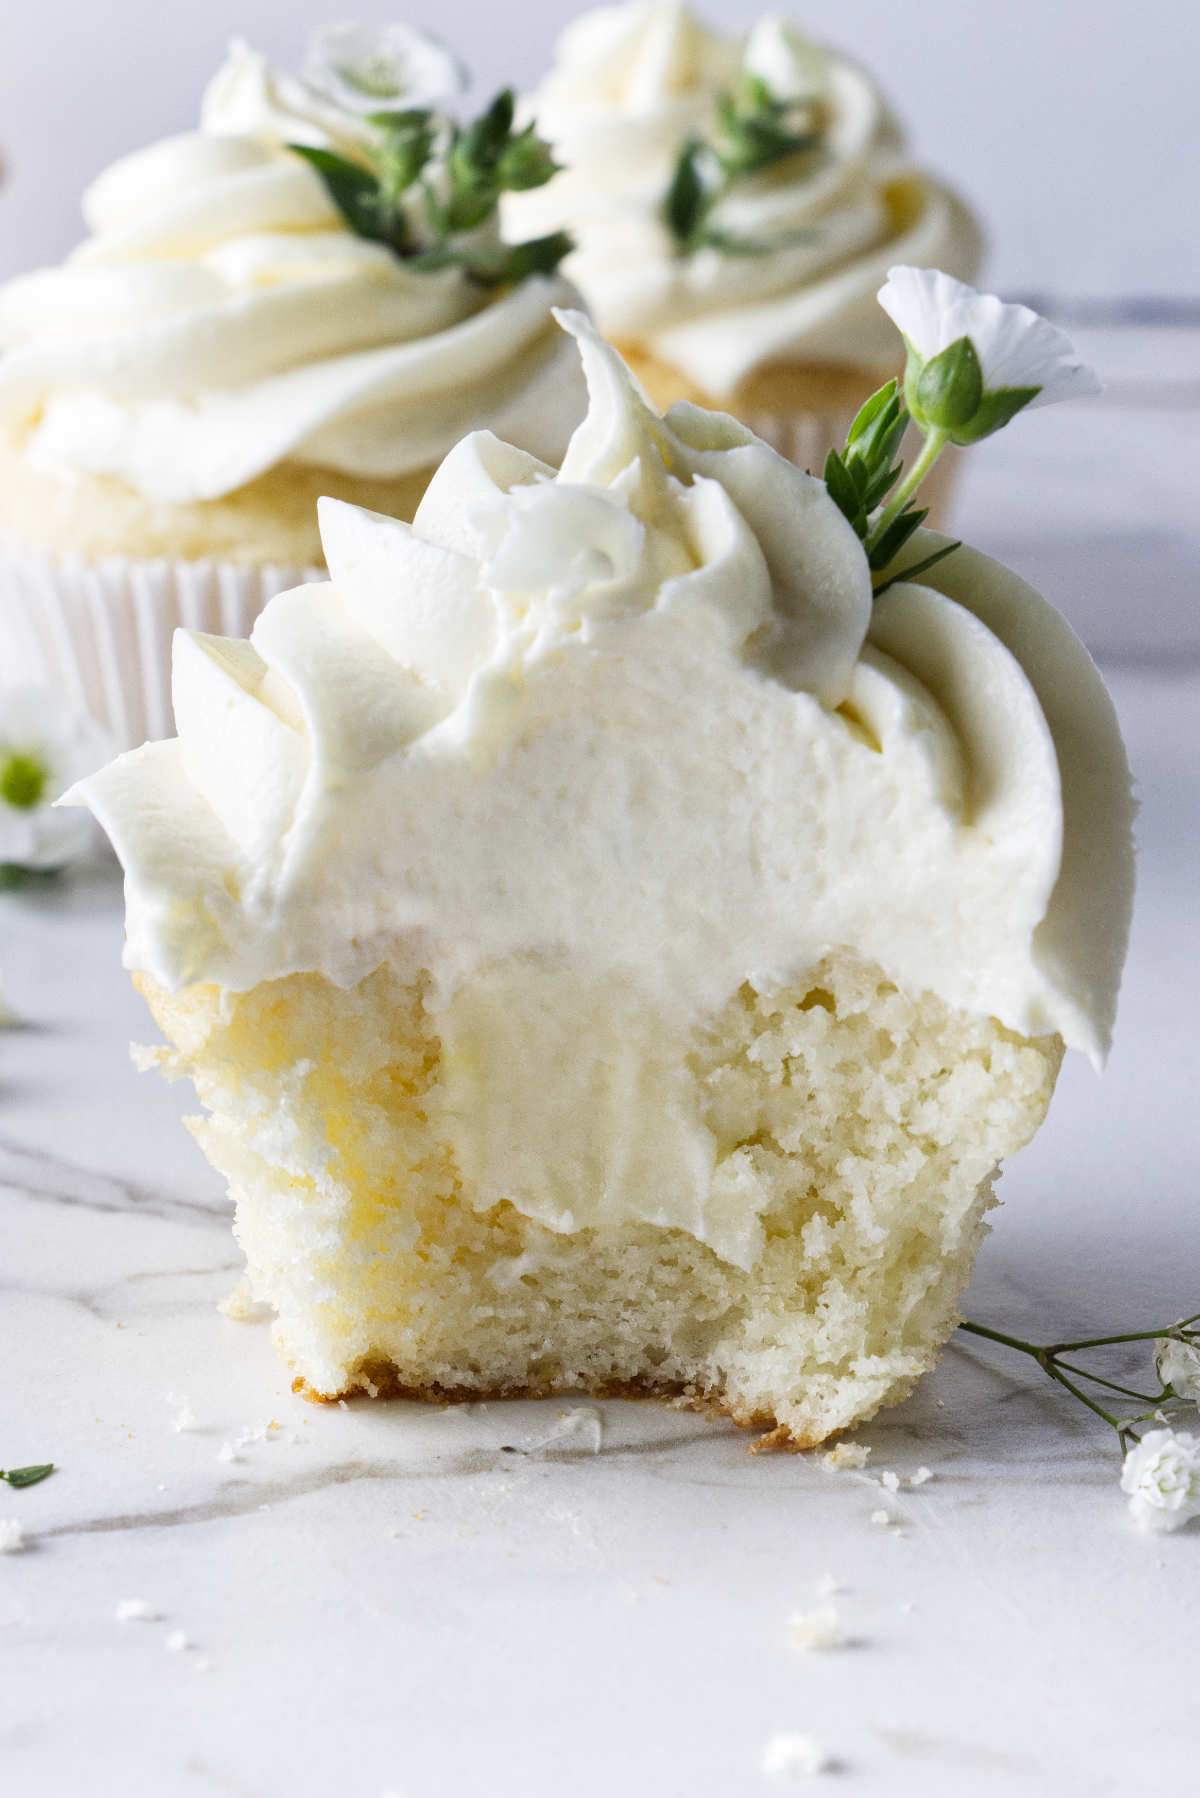 A cupcake sliced open to show teh white chocolate ganache filling in the center.